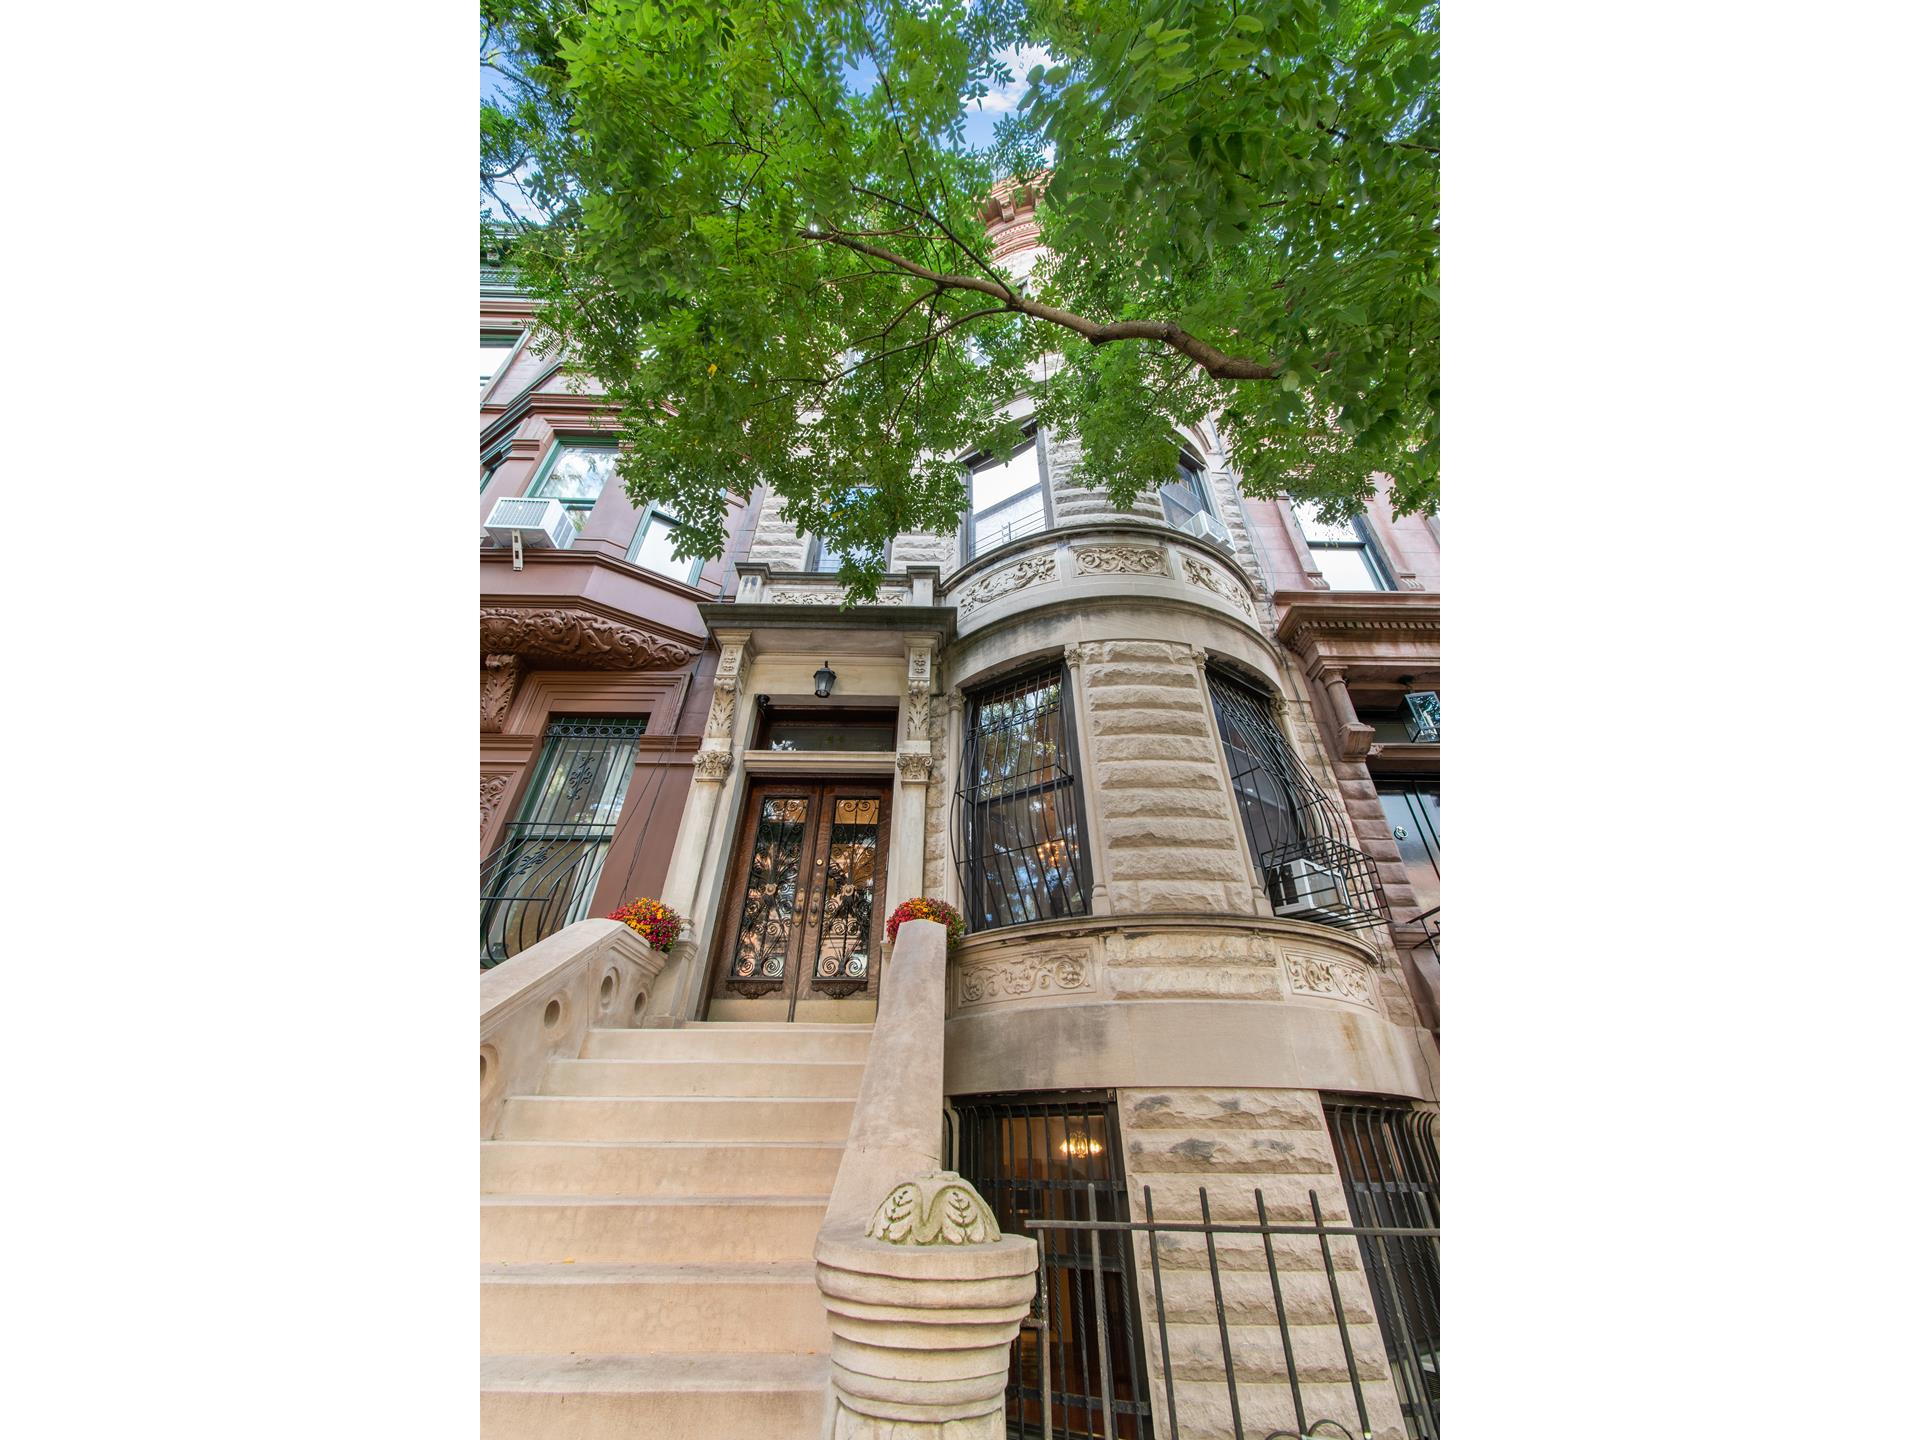 144 West 119th Street, South Harlem, Upper Manhattan, NYC - 5 Bedrooms  
5.5 Bathrooms  
11 Rooms - 